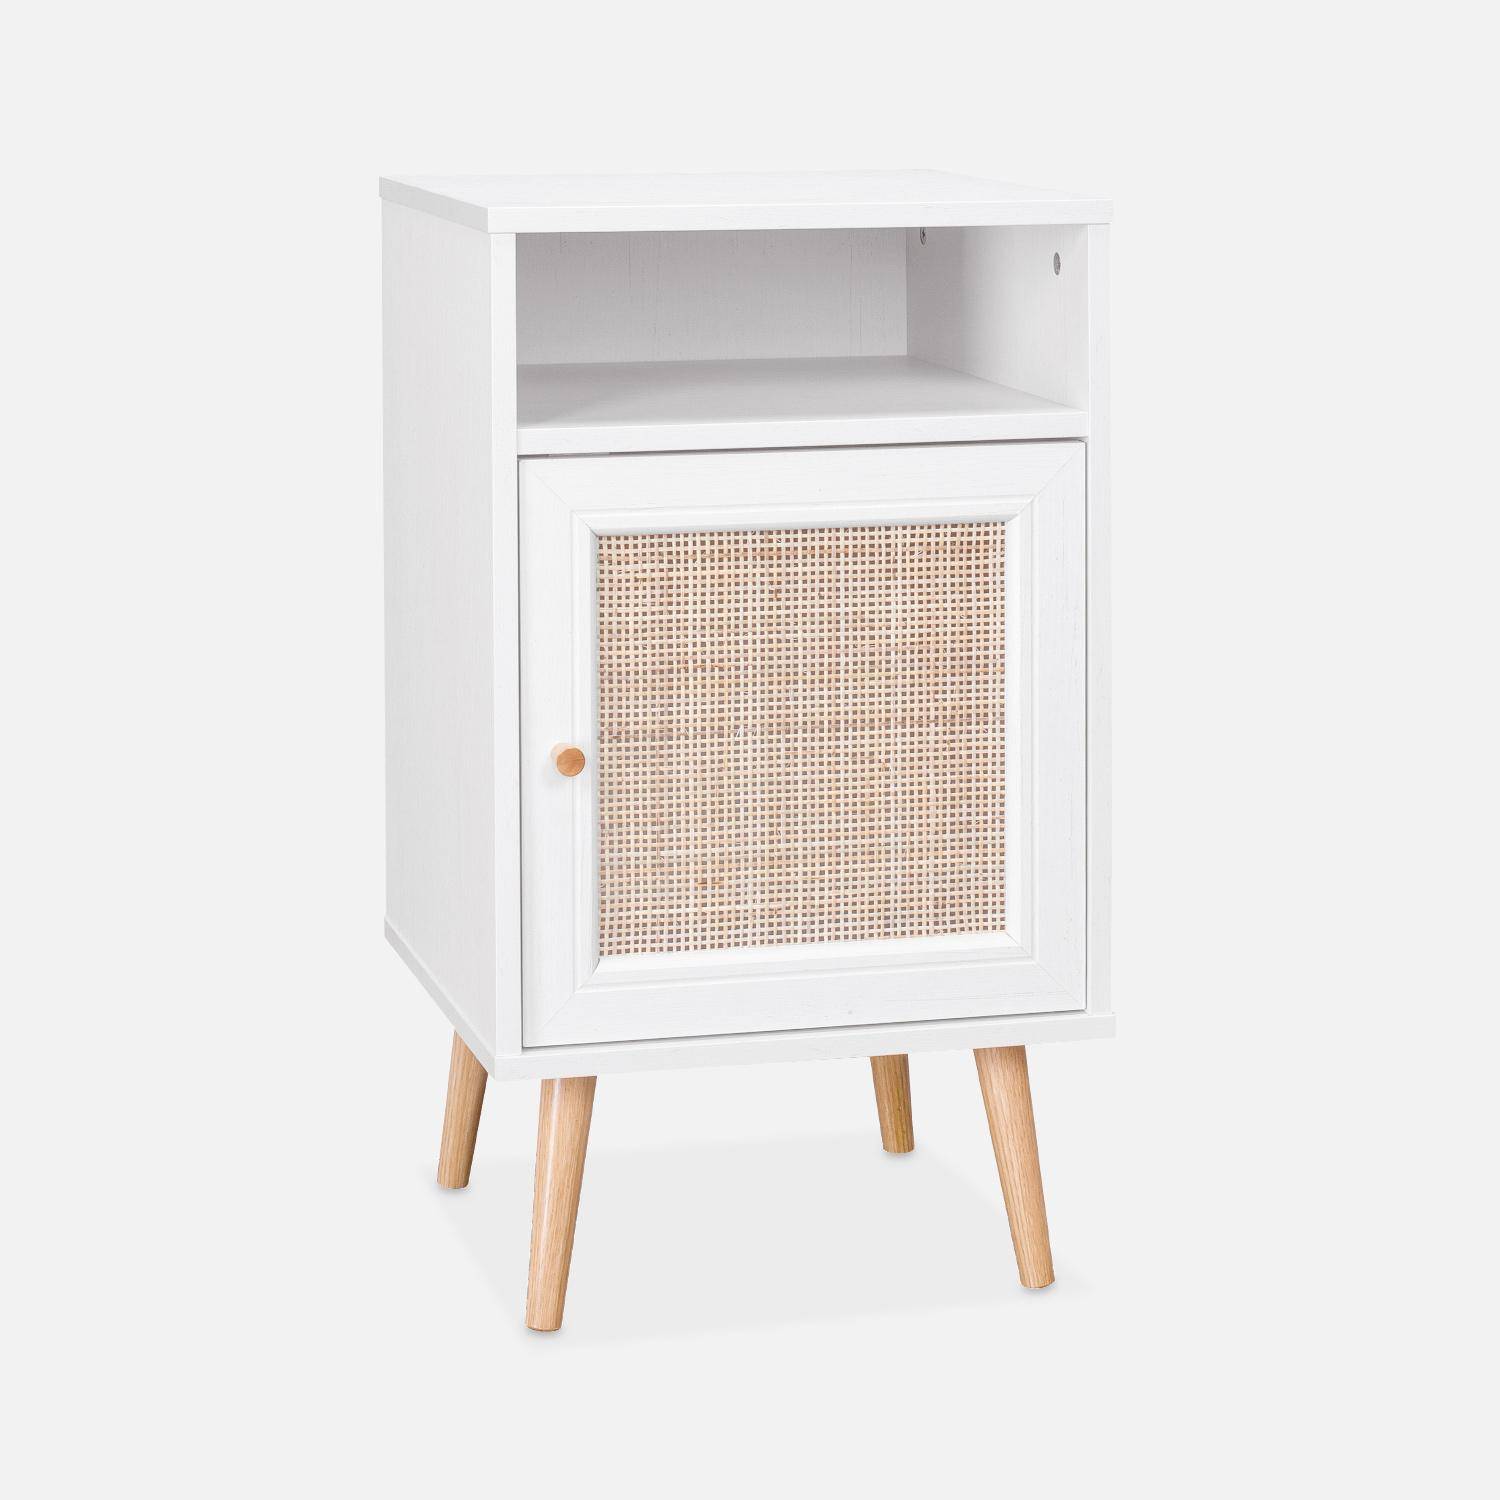 Pair of Scandi-style wood and cane rattan bedside tables with cupboard, 40x39x70cm - Boheme - White,sweeek,Photo6